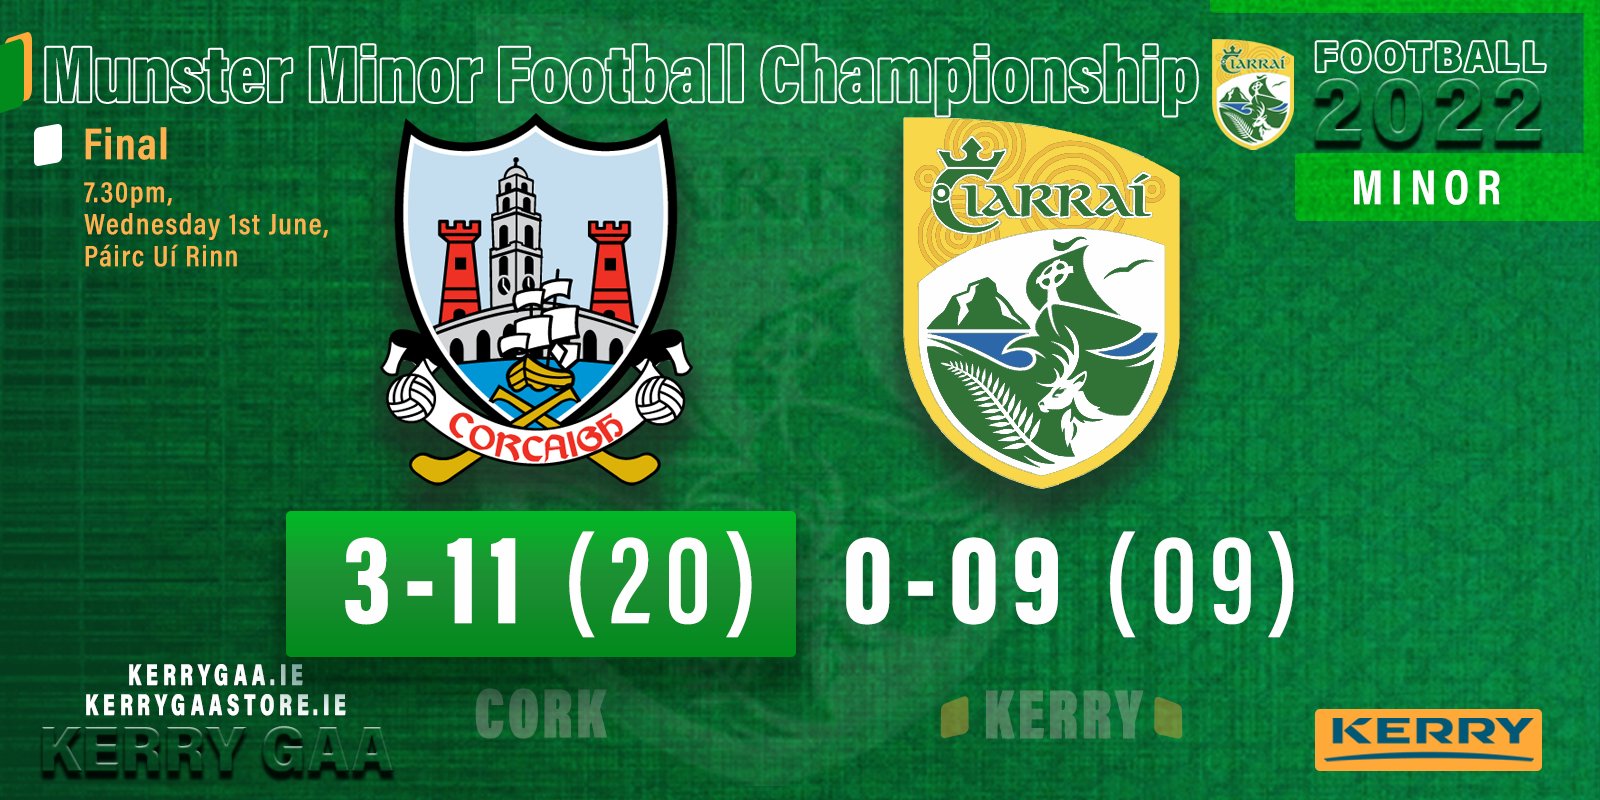 Cork defeat Kerry in Electric Ireland Munster MFC Final